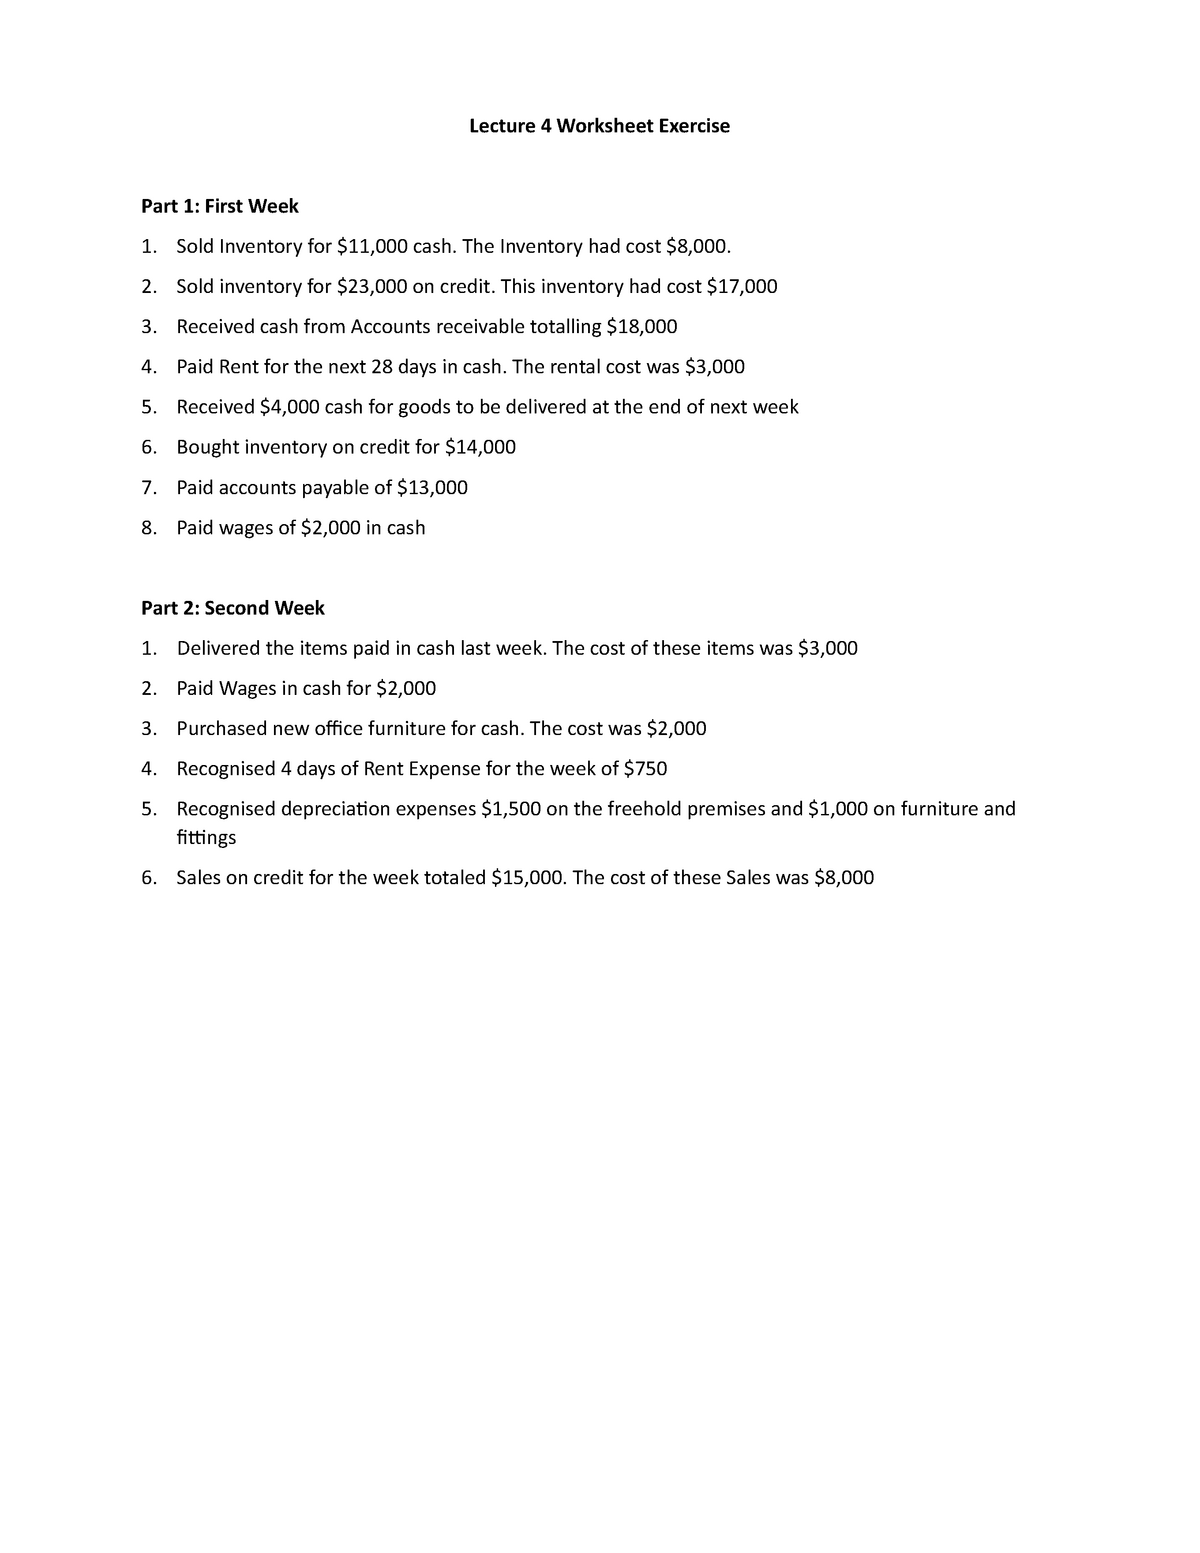 Topic 4 Lecture Worksheet - Lecture 4 Worksheet Exercise Part 1: First ...